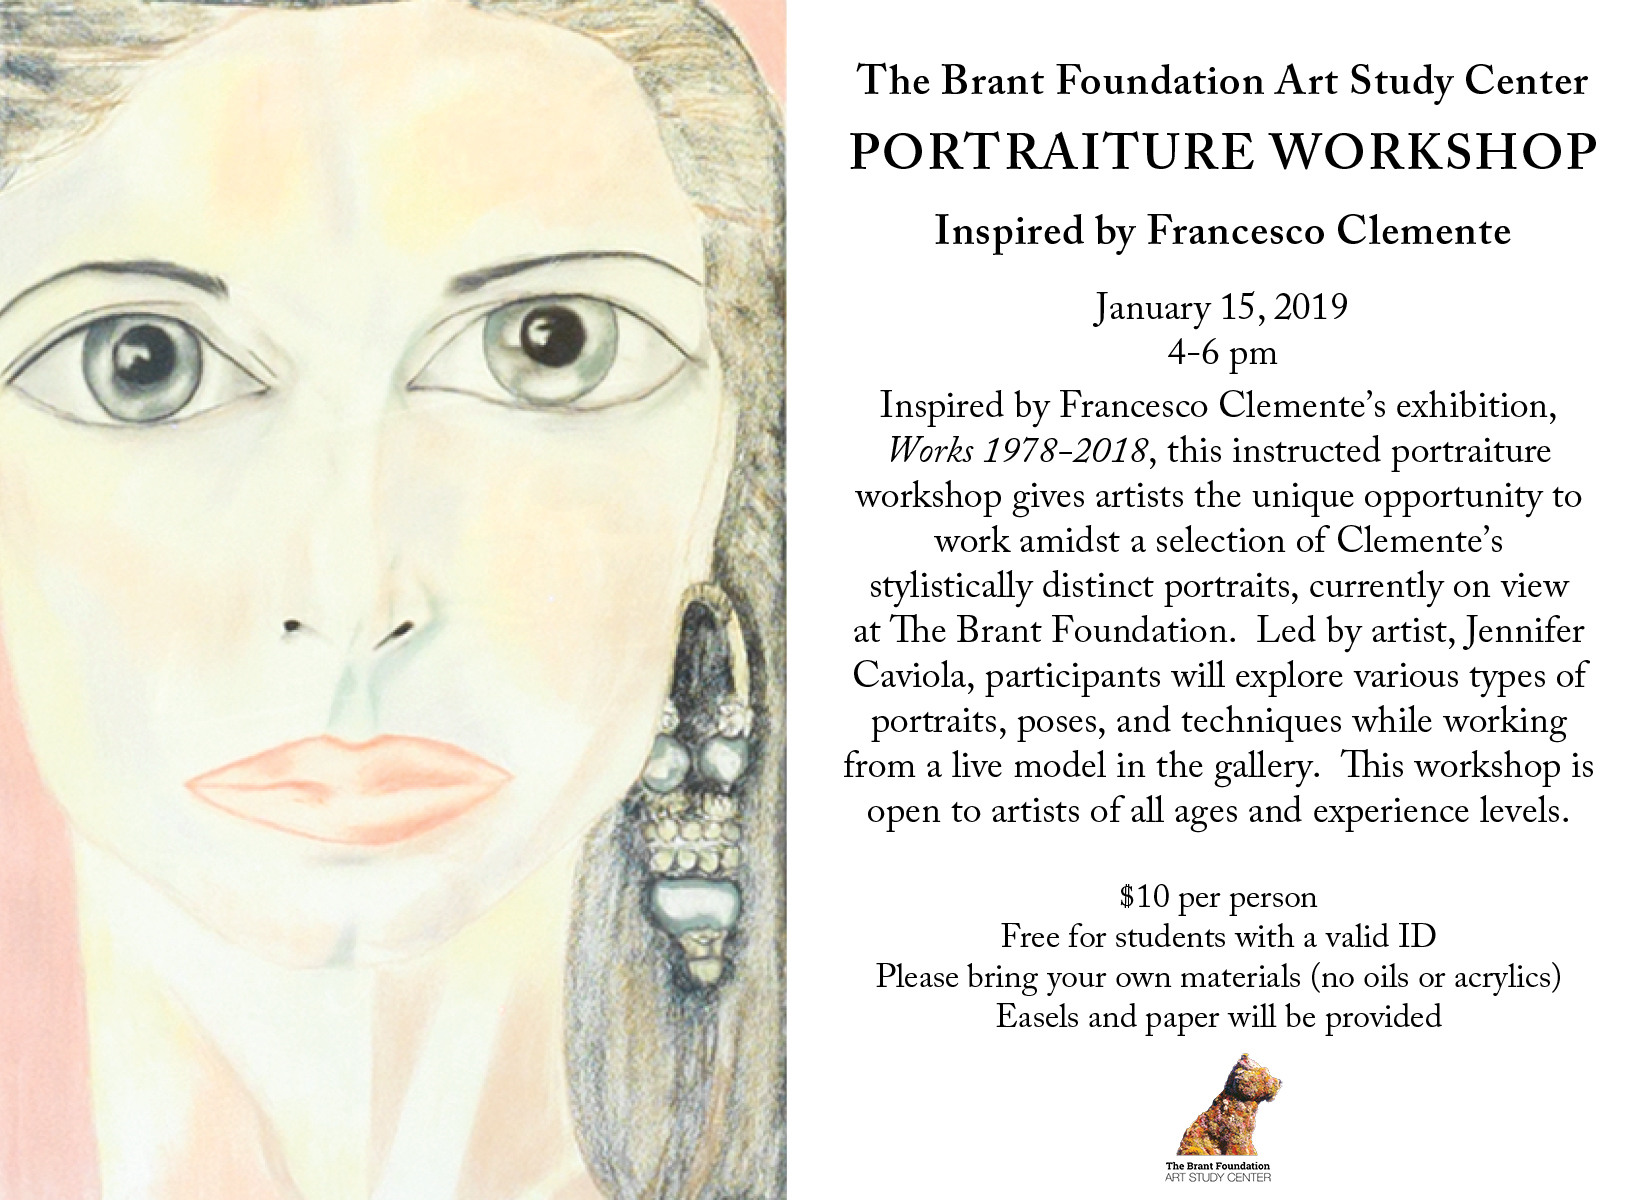 Instructed Portraiture Workshop 
Inspired by Francesco Clemente